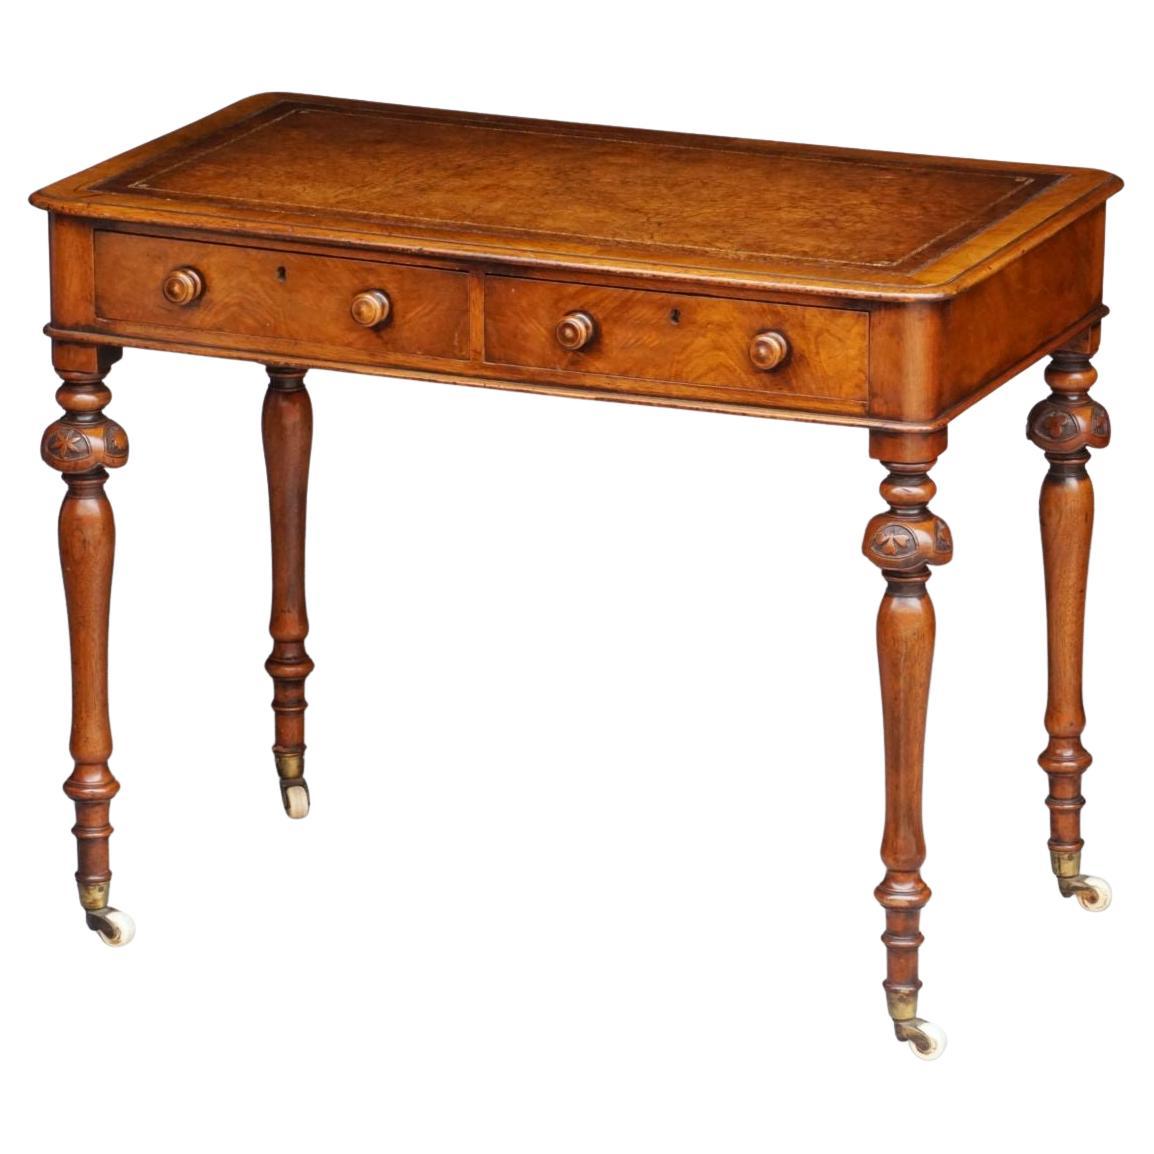 English Writing Desk or Table of Mahogany with Leather Top from the 19th Century